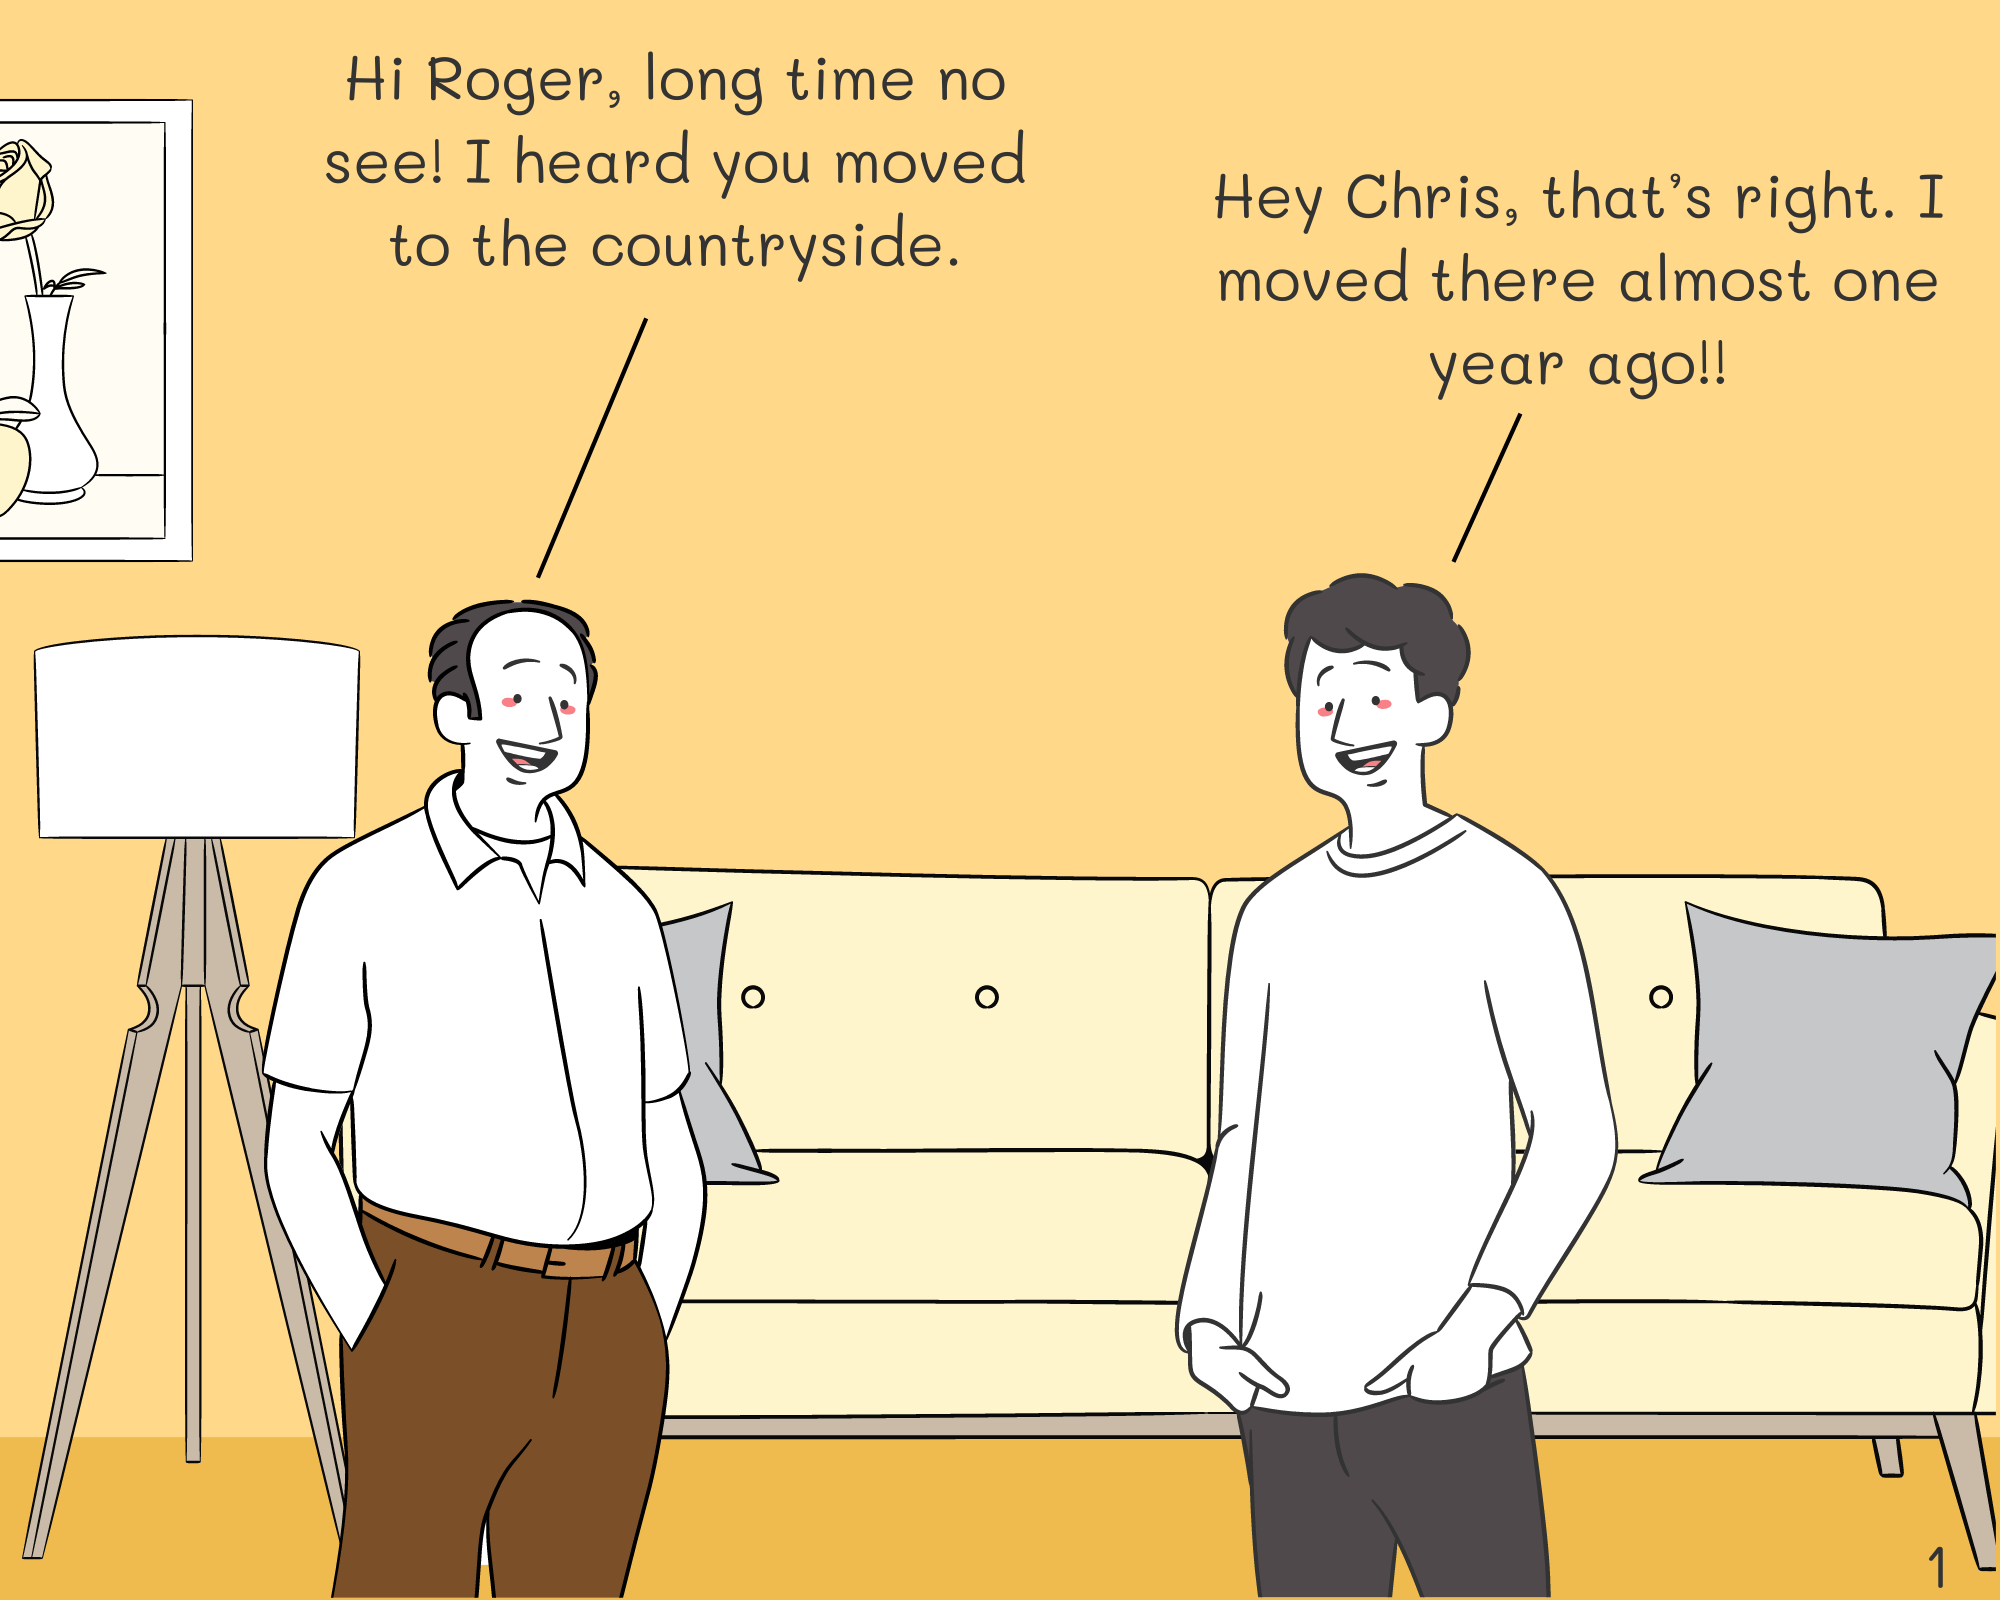 Chris: Hi Roger, long time no see! I heard you moved to the countryside.
Roger: Hey Chris, that’s right. I moved there almost one year ago!!